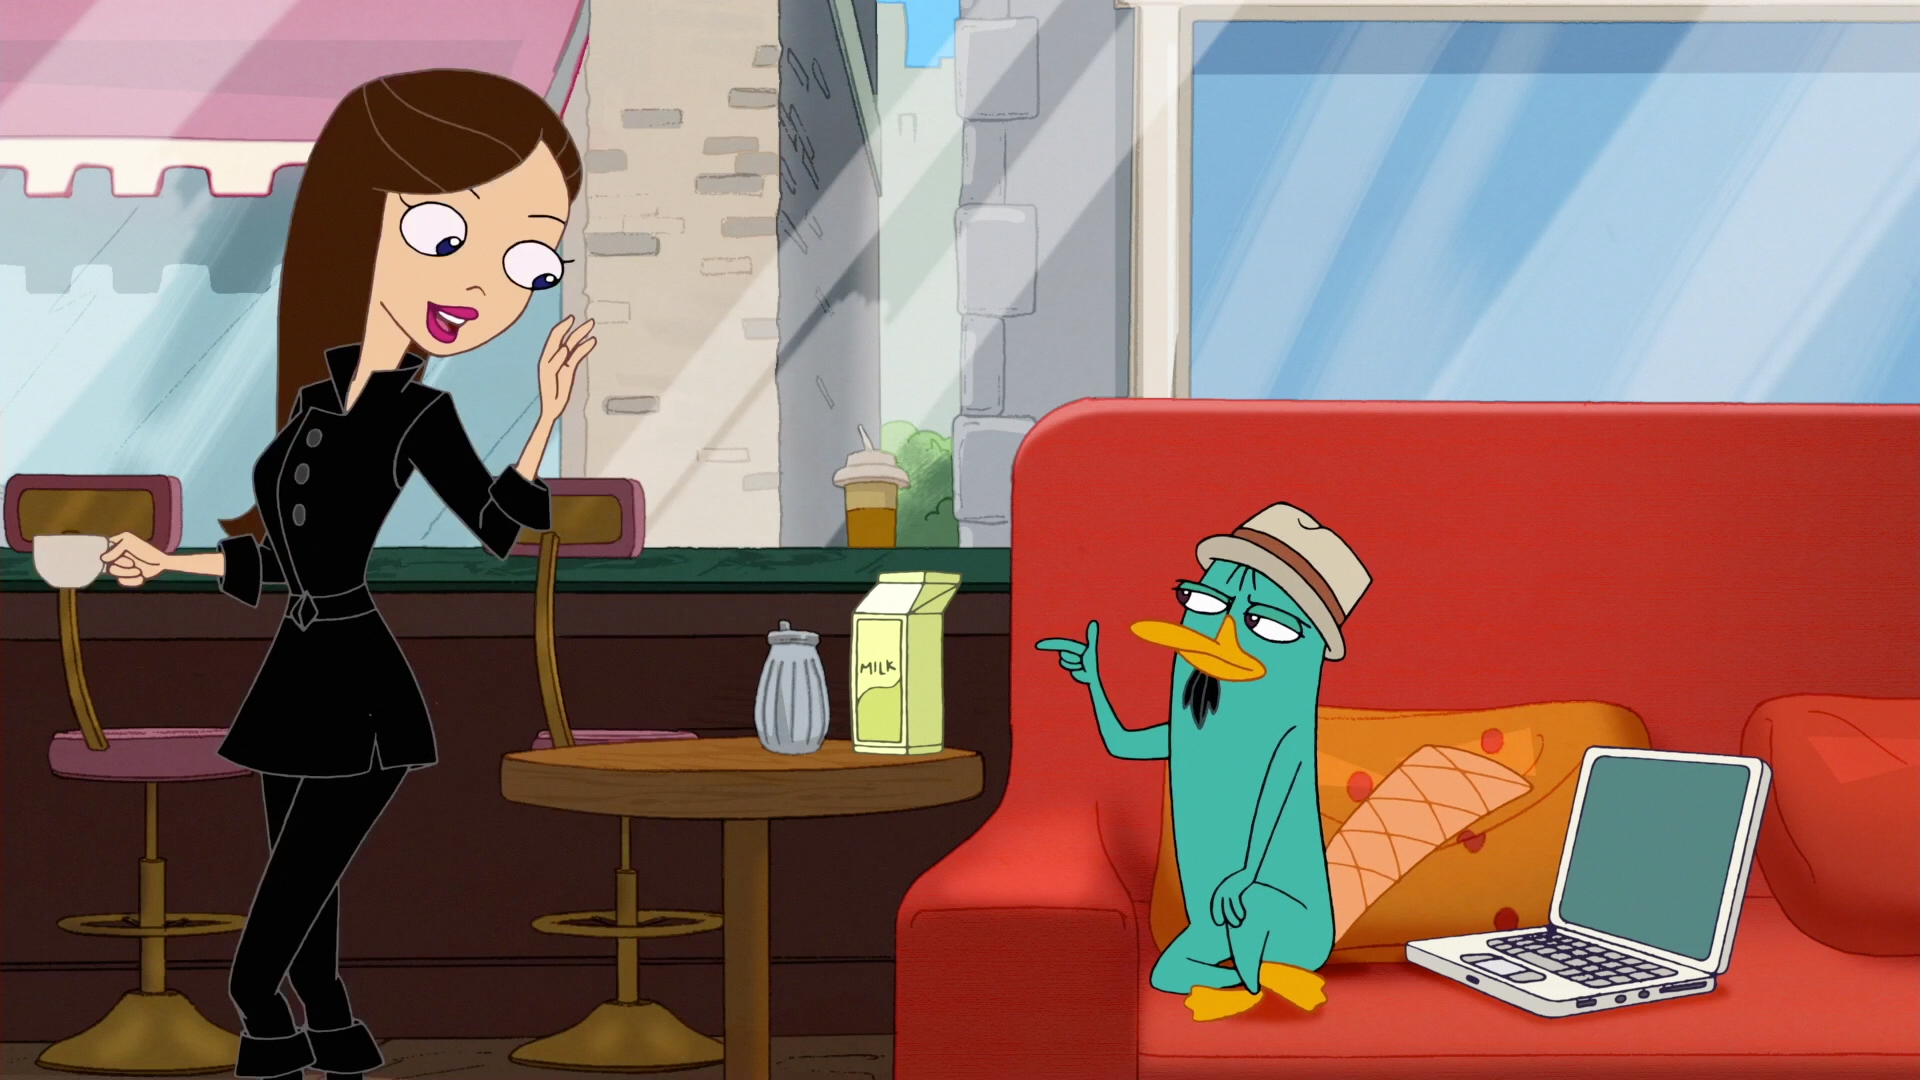 Perry and Vanessa's relationship.